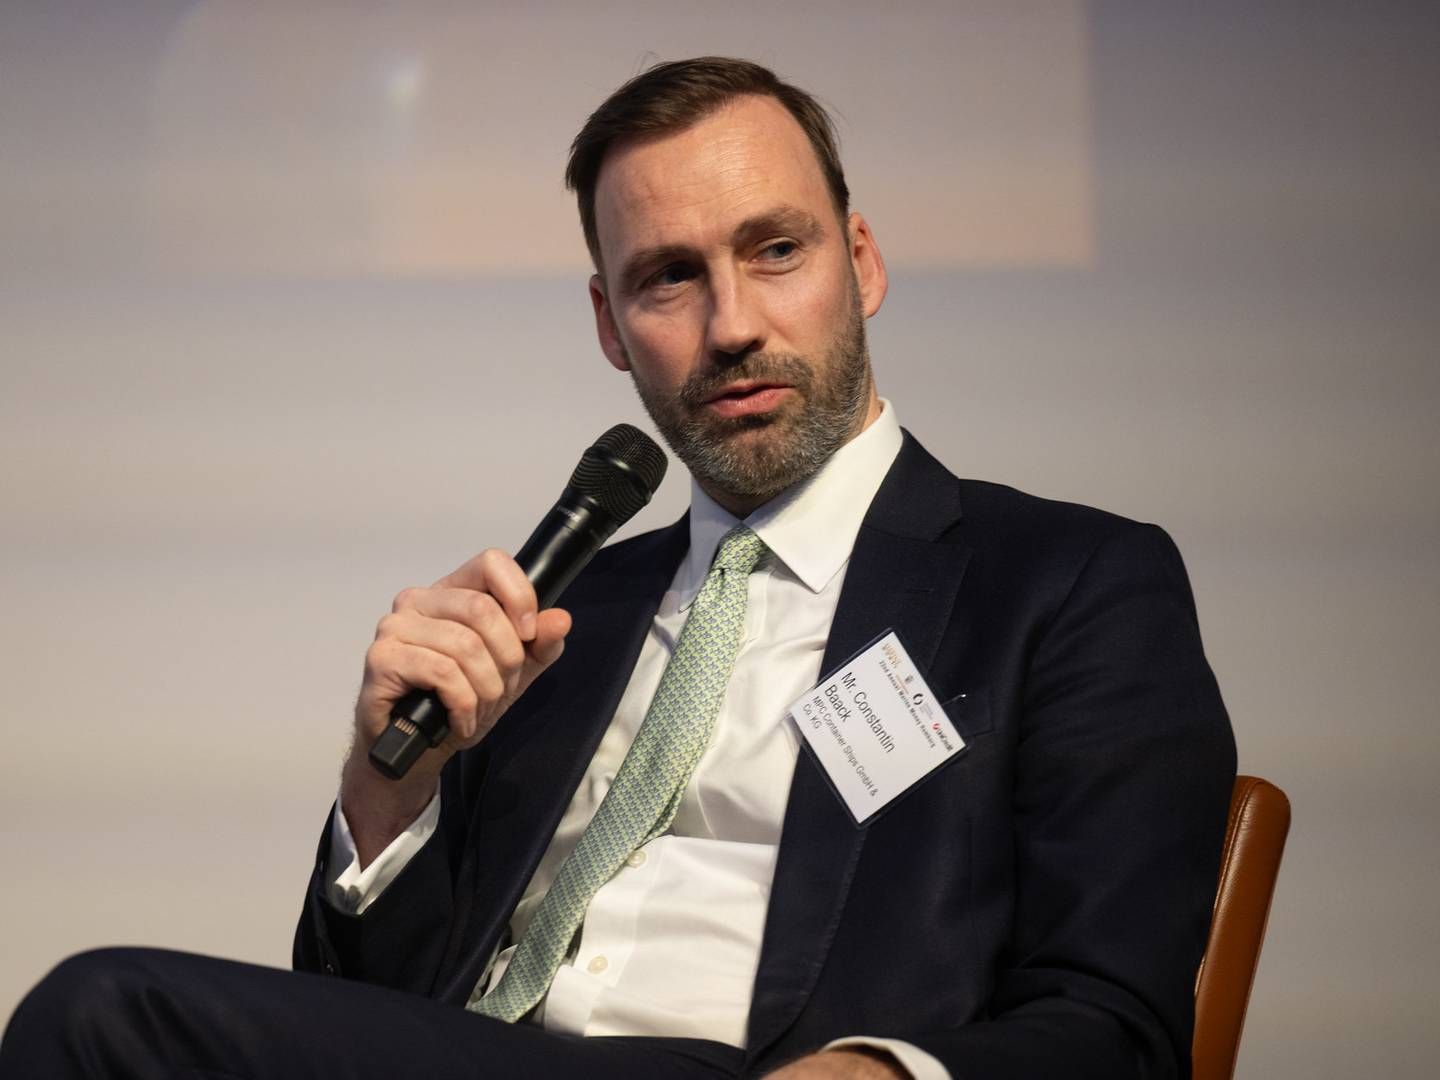 ”Two years for smaller ships, which is what we see right now, is definitely something we haven’t seen for the last 8-12 months, if at all,” says Constantin Baack, CEO of MPC Container Ships. | Photo: Marine Money